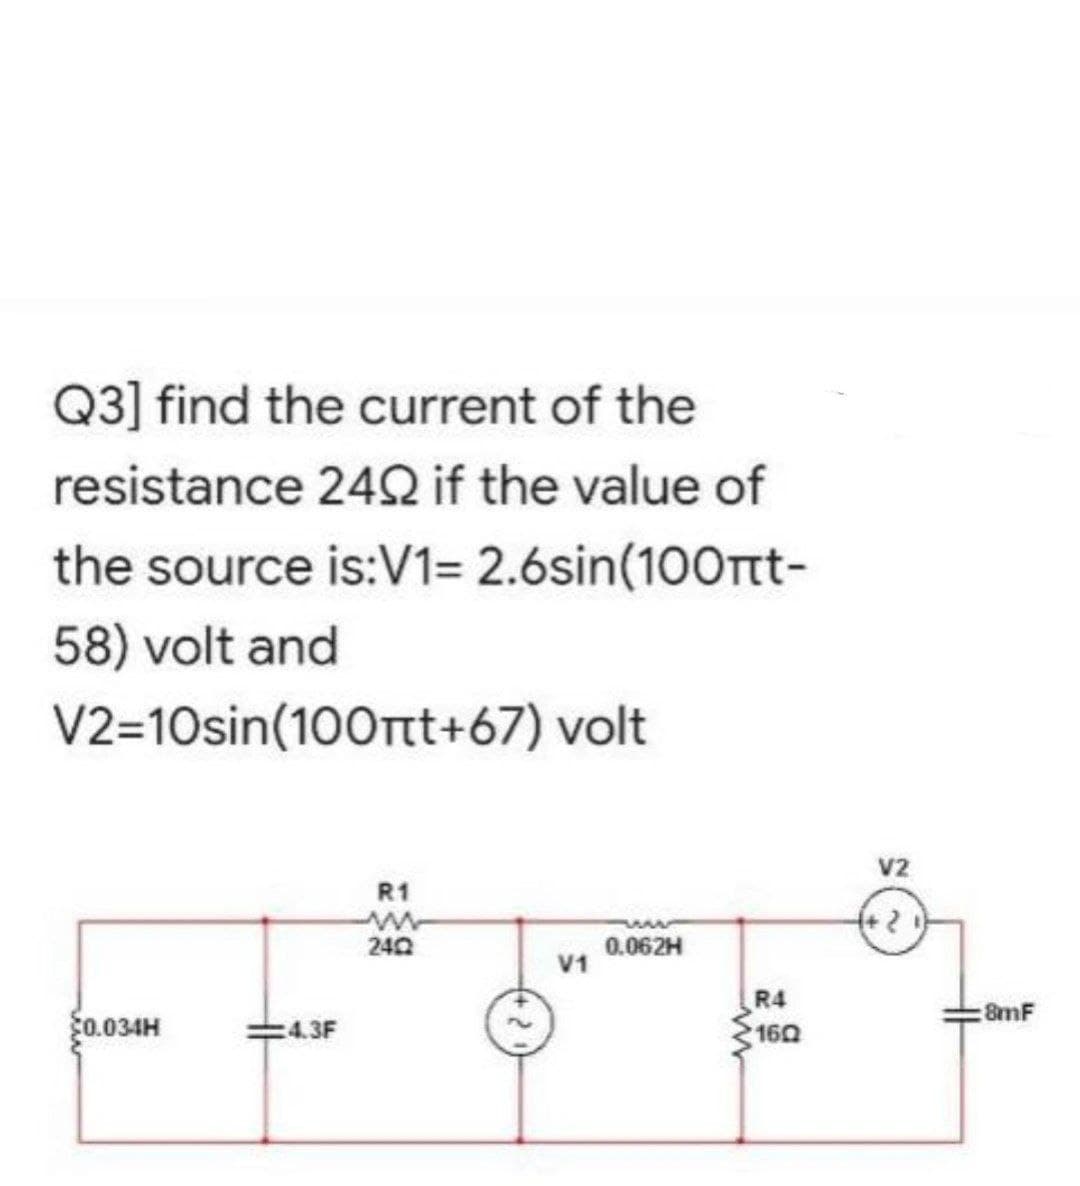 Q3] find the current of the
resistance 2492 if the value of
the source is:V1= 2.6sin(100ft-
58) volt and
V2=10sin(100πt+67) volt
R1
w
240
0.062H
$0.034H
4.3F
V1
R4
160
V2
:8mF